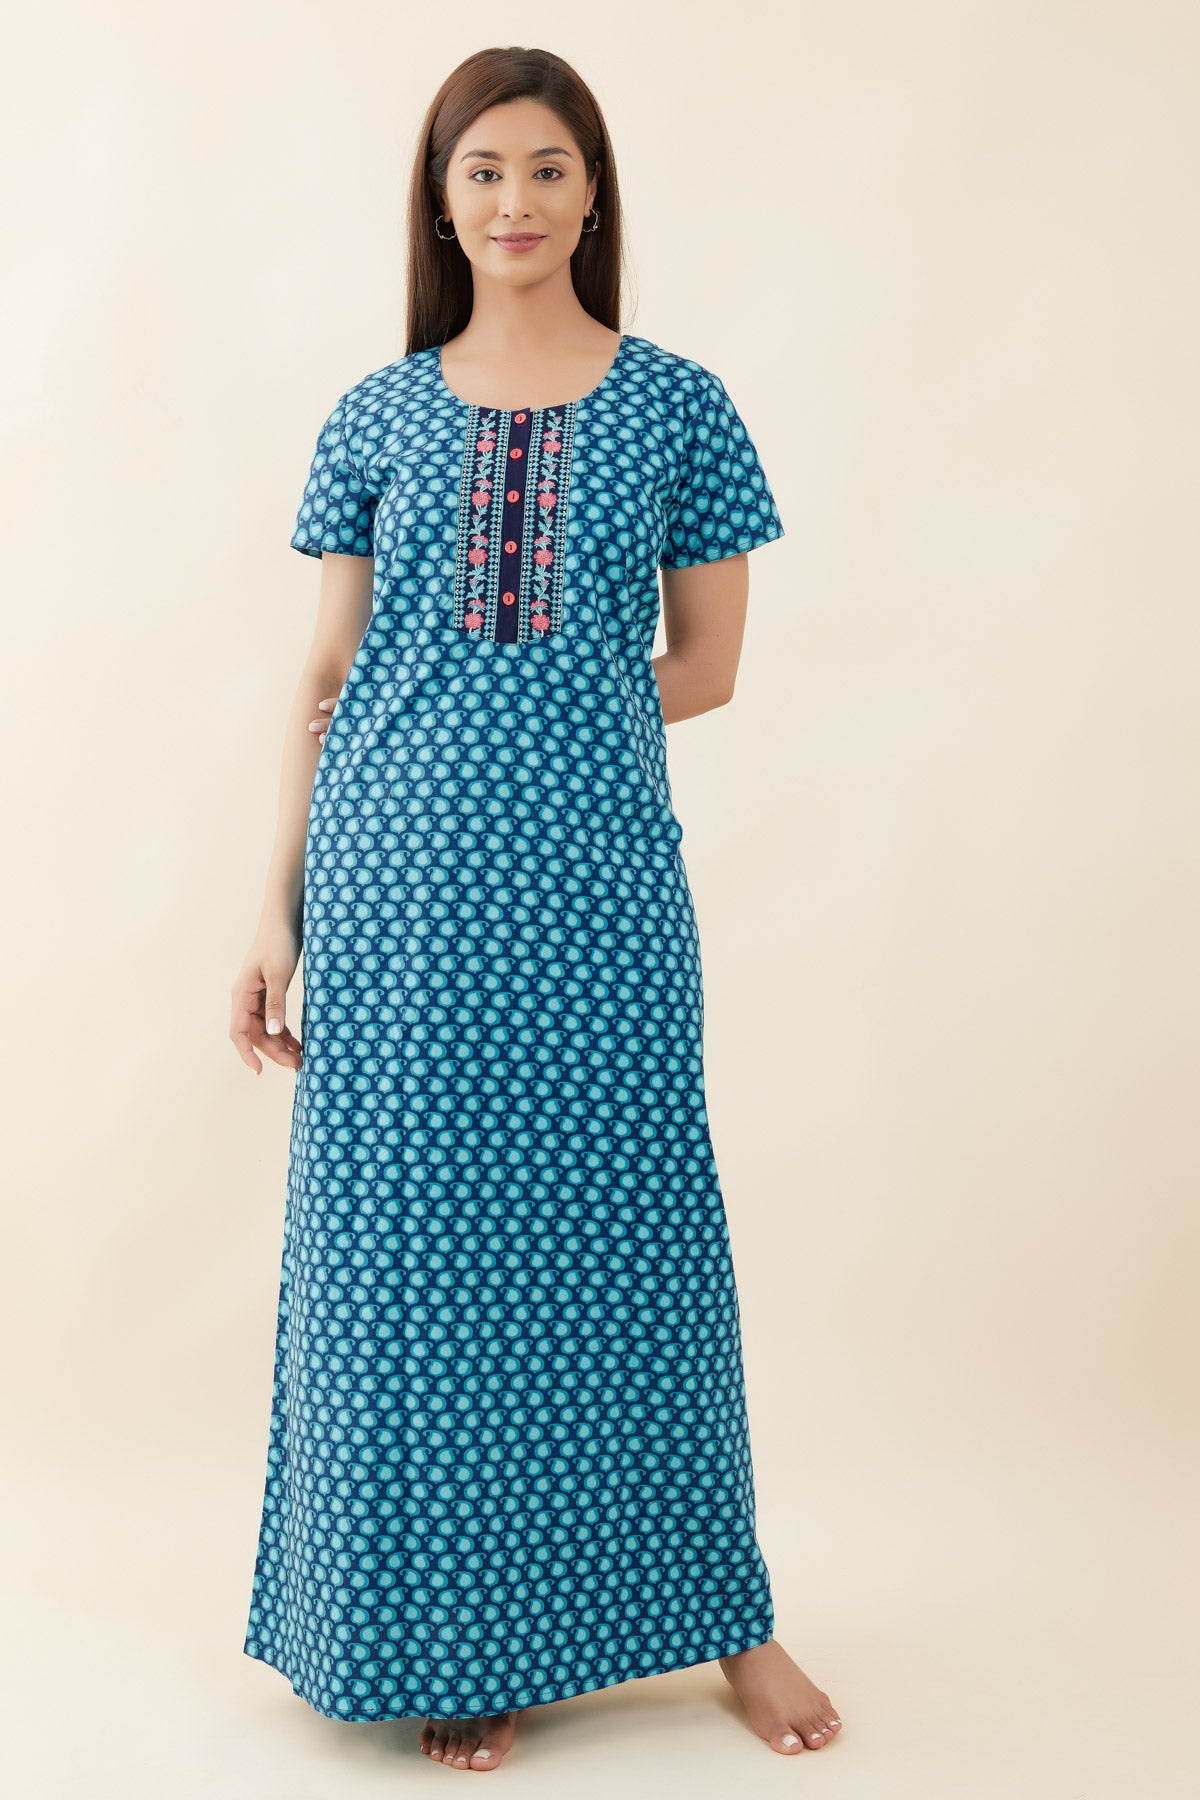 All Over Paisley Printed With Contrast Embroidered Yoke Nighty - Blue